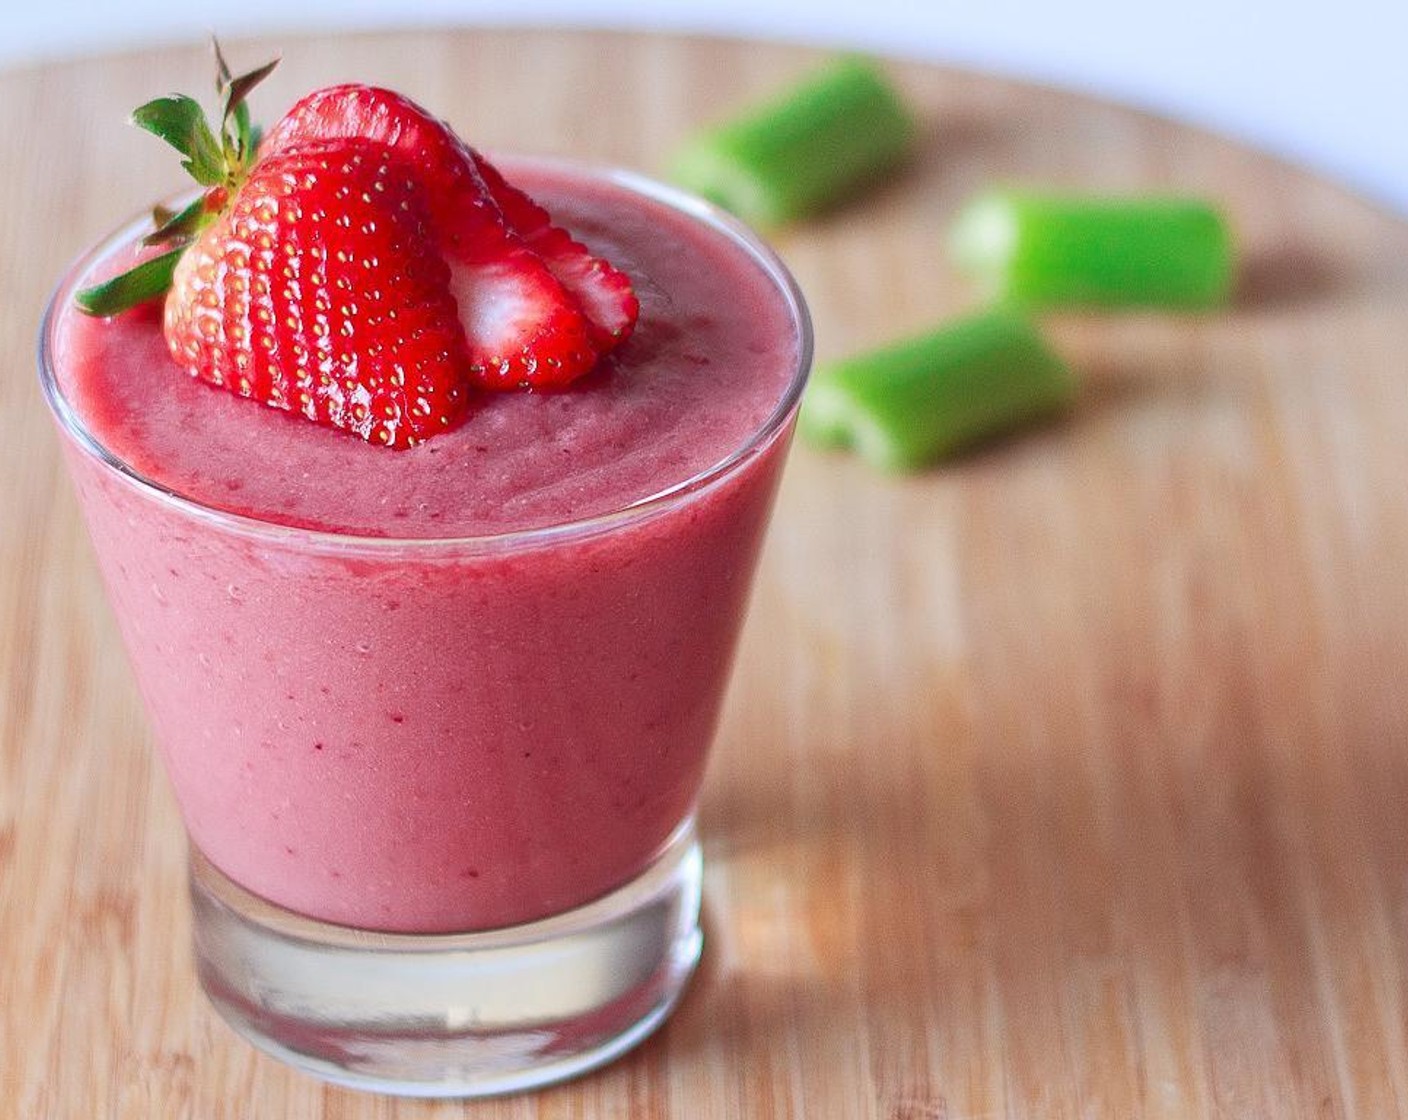 step 4 Combine Water (1 cup), celery, red apple, banana, Frozen Strawberries (1 cup) and Frozen Raspberries (1 cup) in a powerful blender. Blend on the highest speed until smooth and creamy.